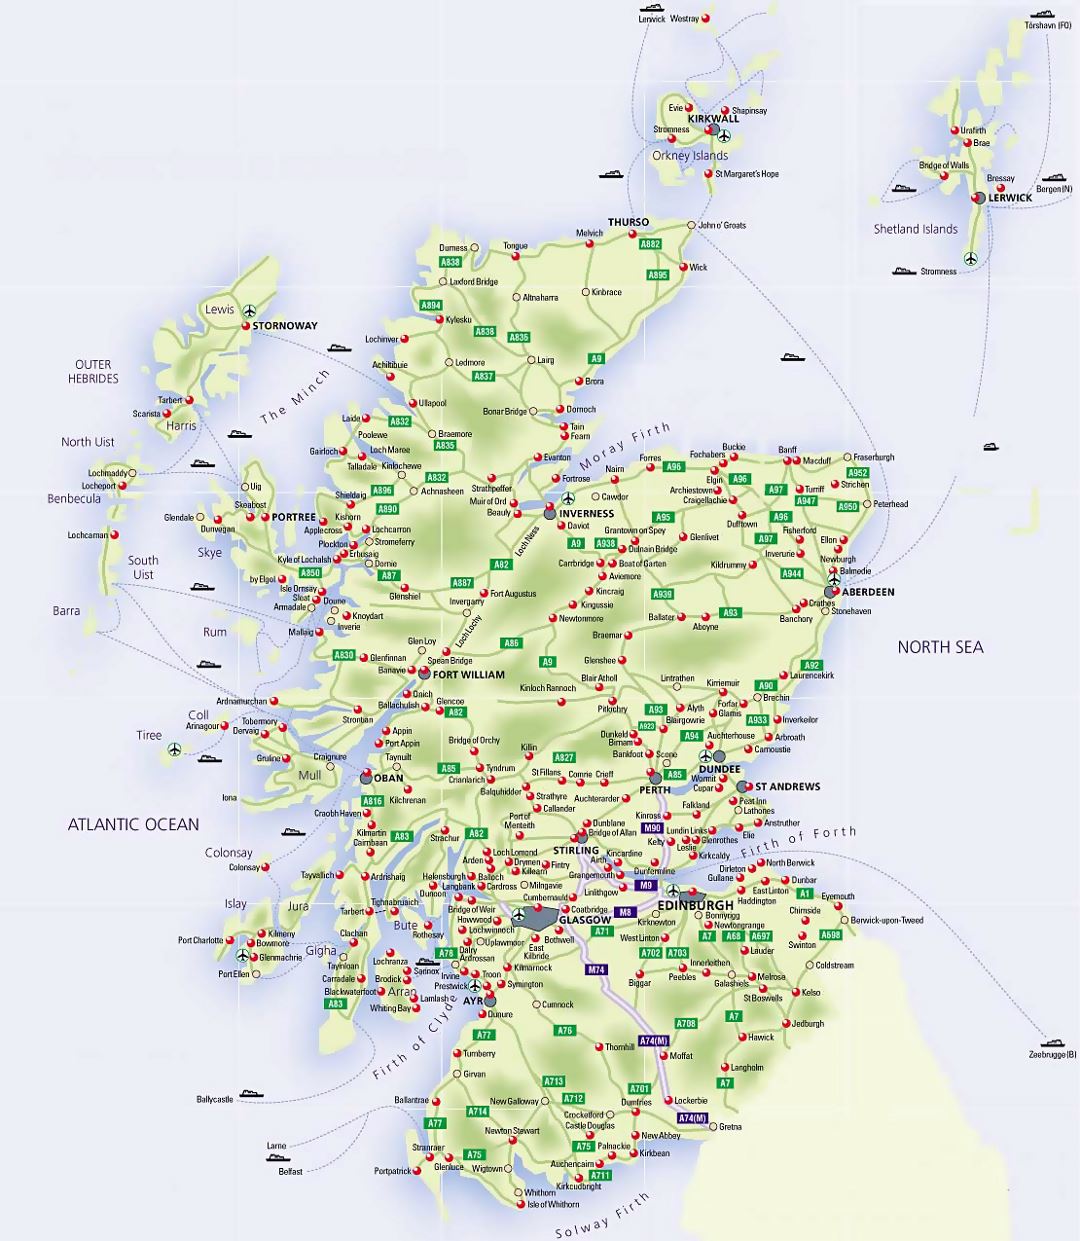 Road map of Scotland with airports and cities